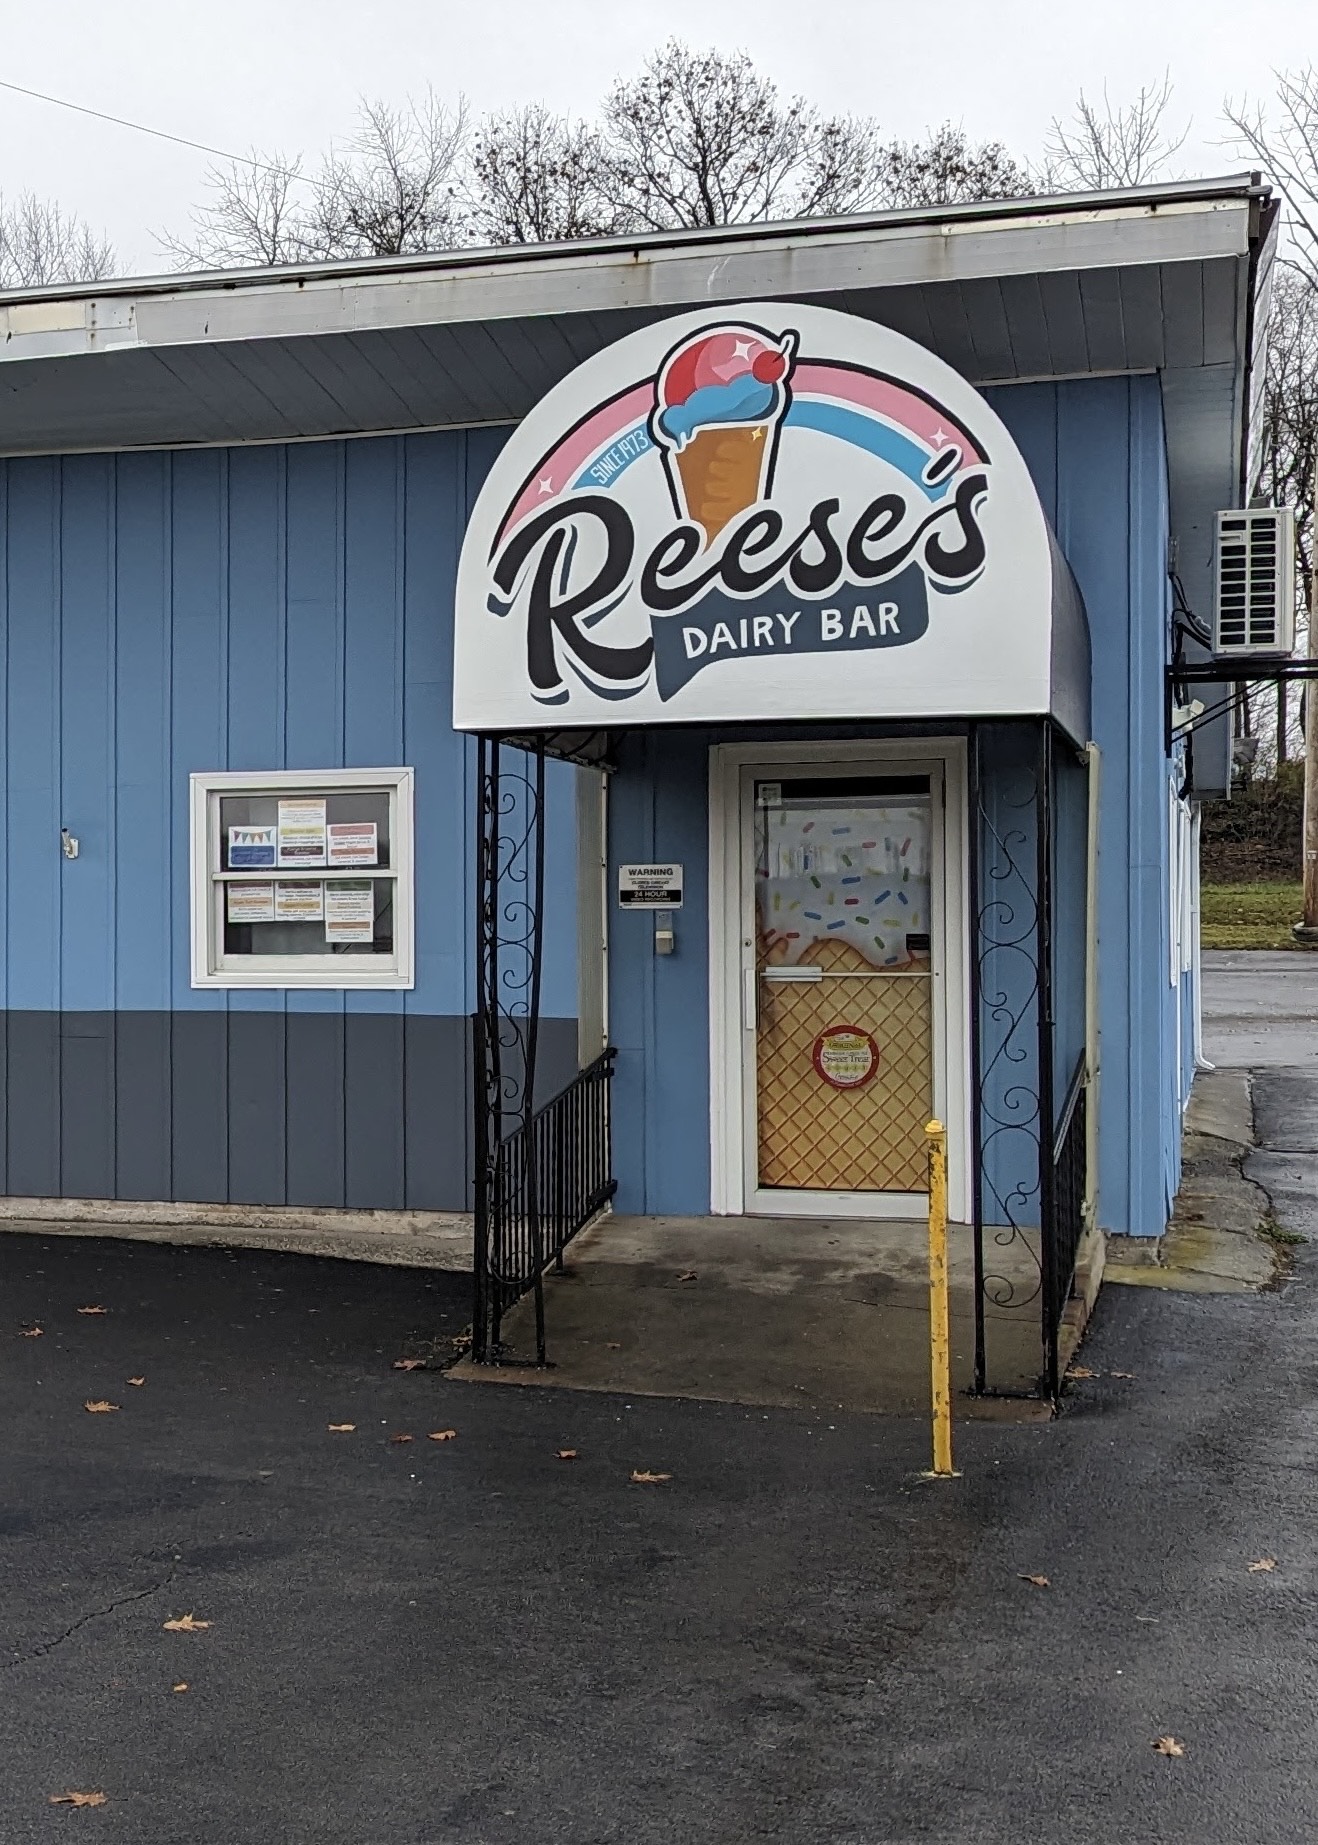 Reese’s Dairy Bar Image